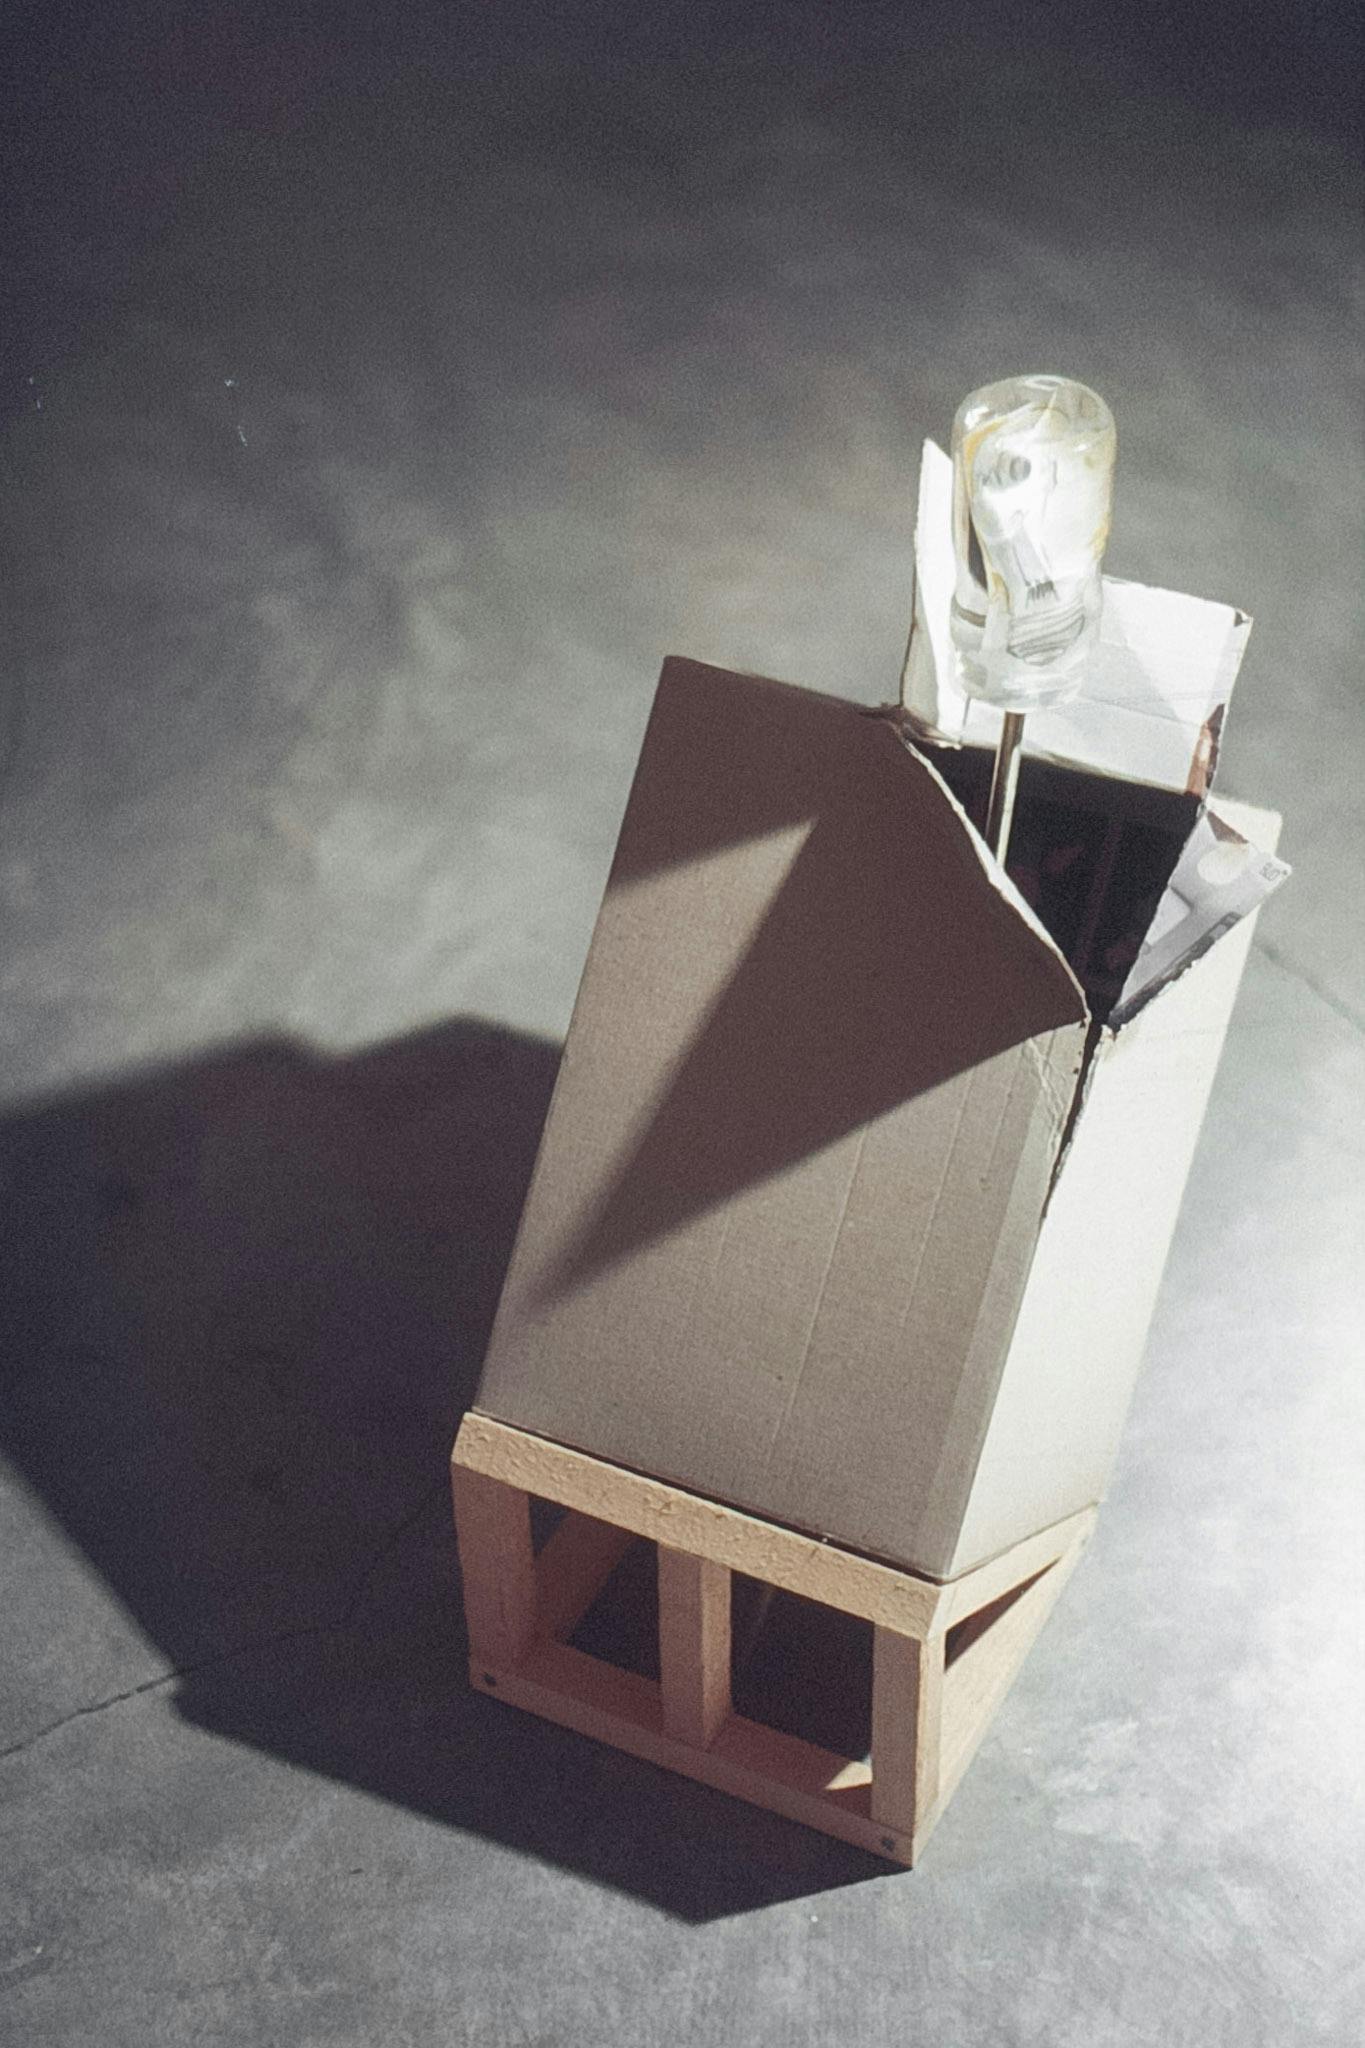 A closeup of a small sculpture on a concrete floor. The work is a cardboard box on a small wood ramp. The corner of the box is open, a screwdriver with a clear handle shaped like a lightbulb inside.